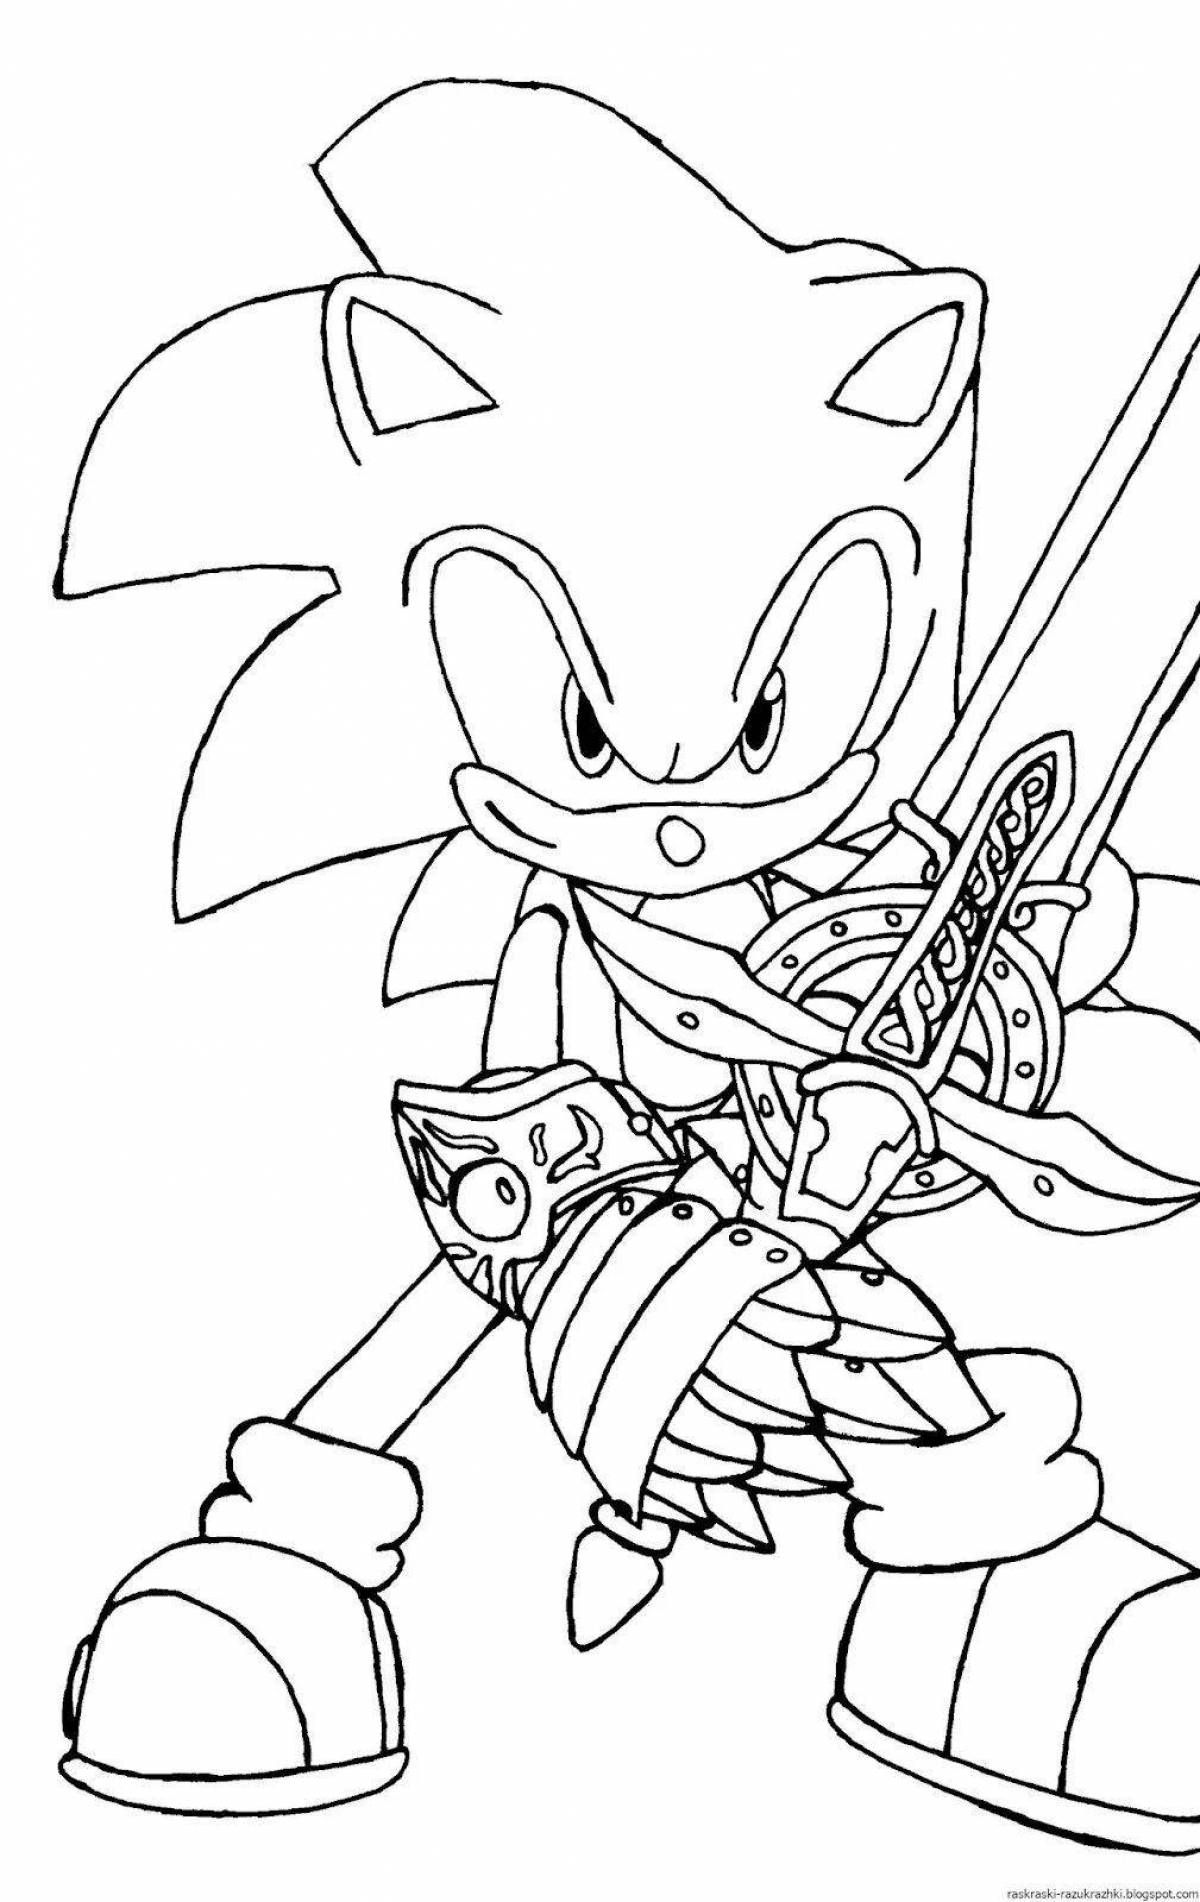 Hyper sonic live coloring page